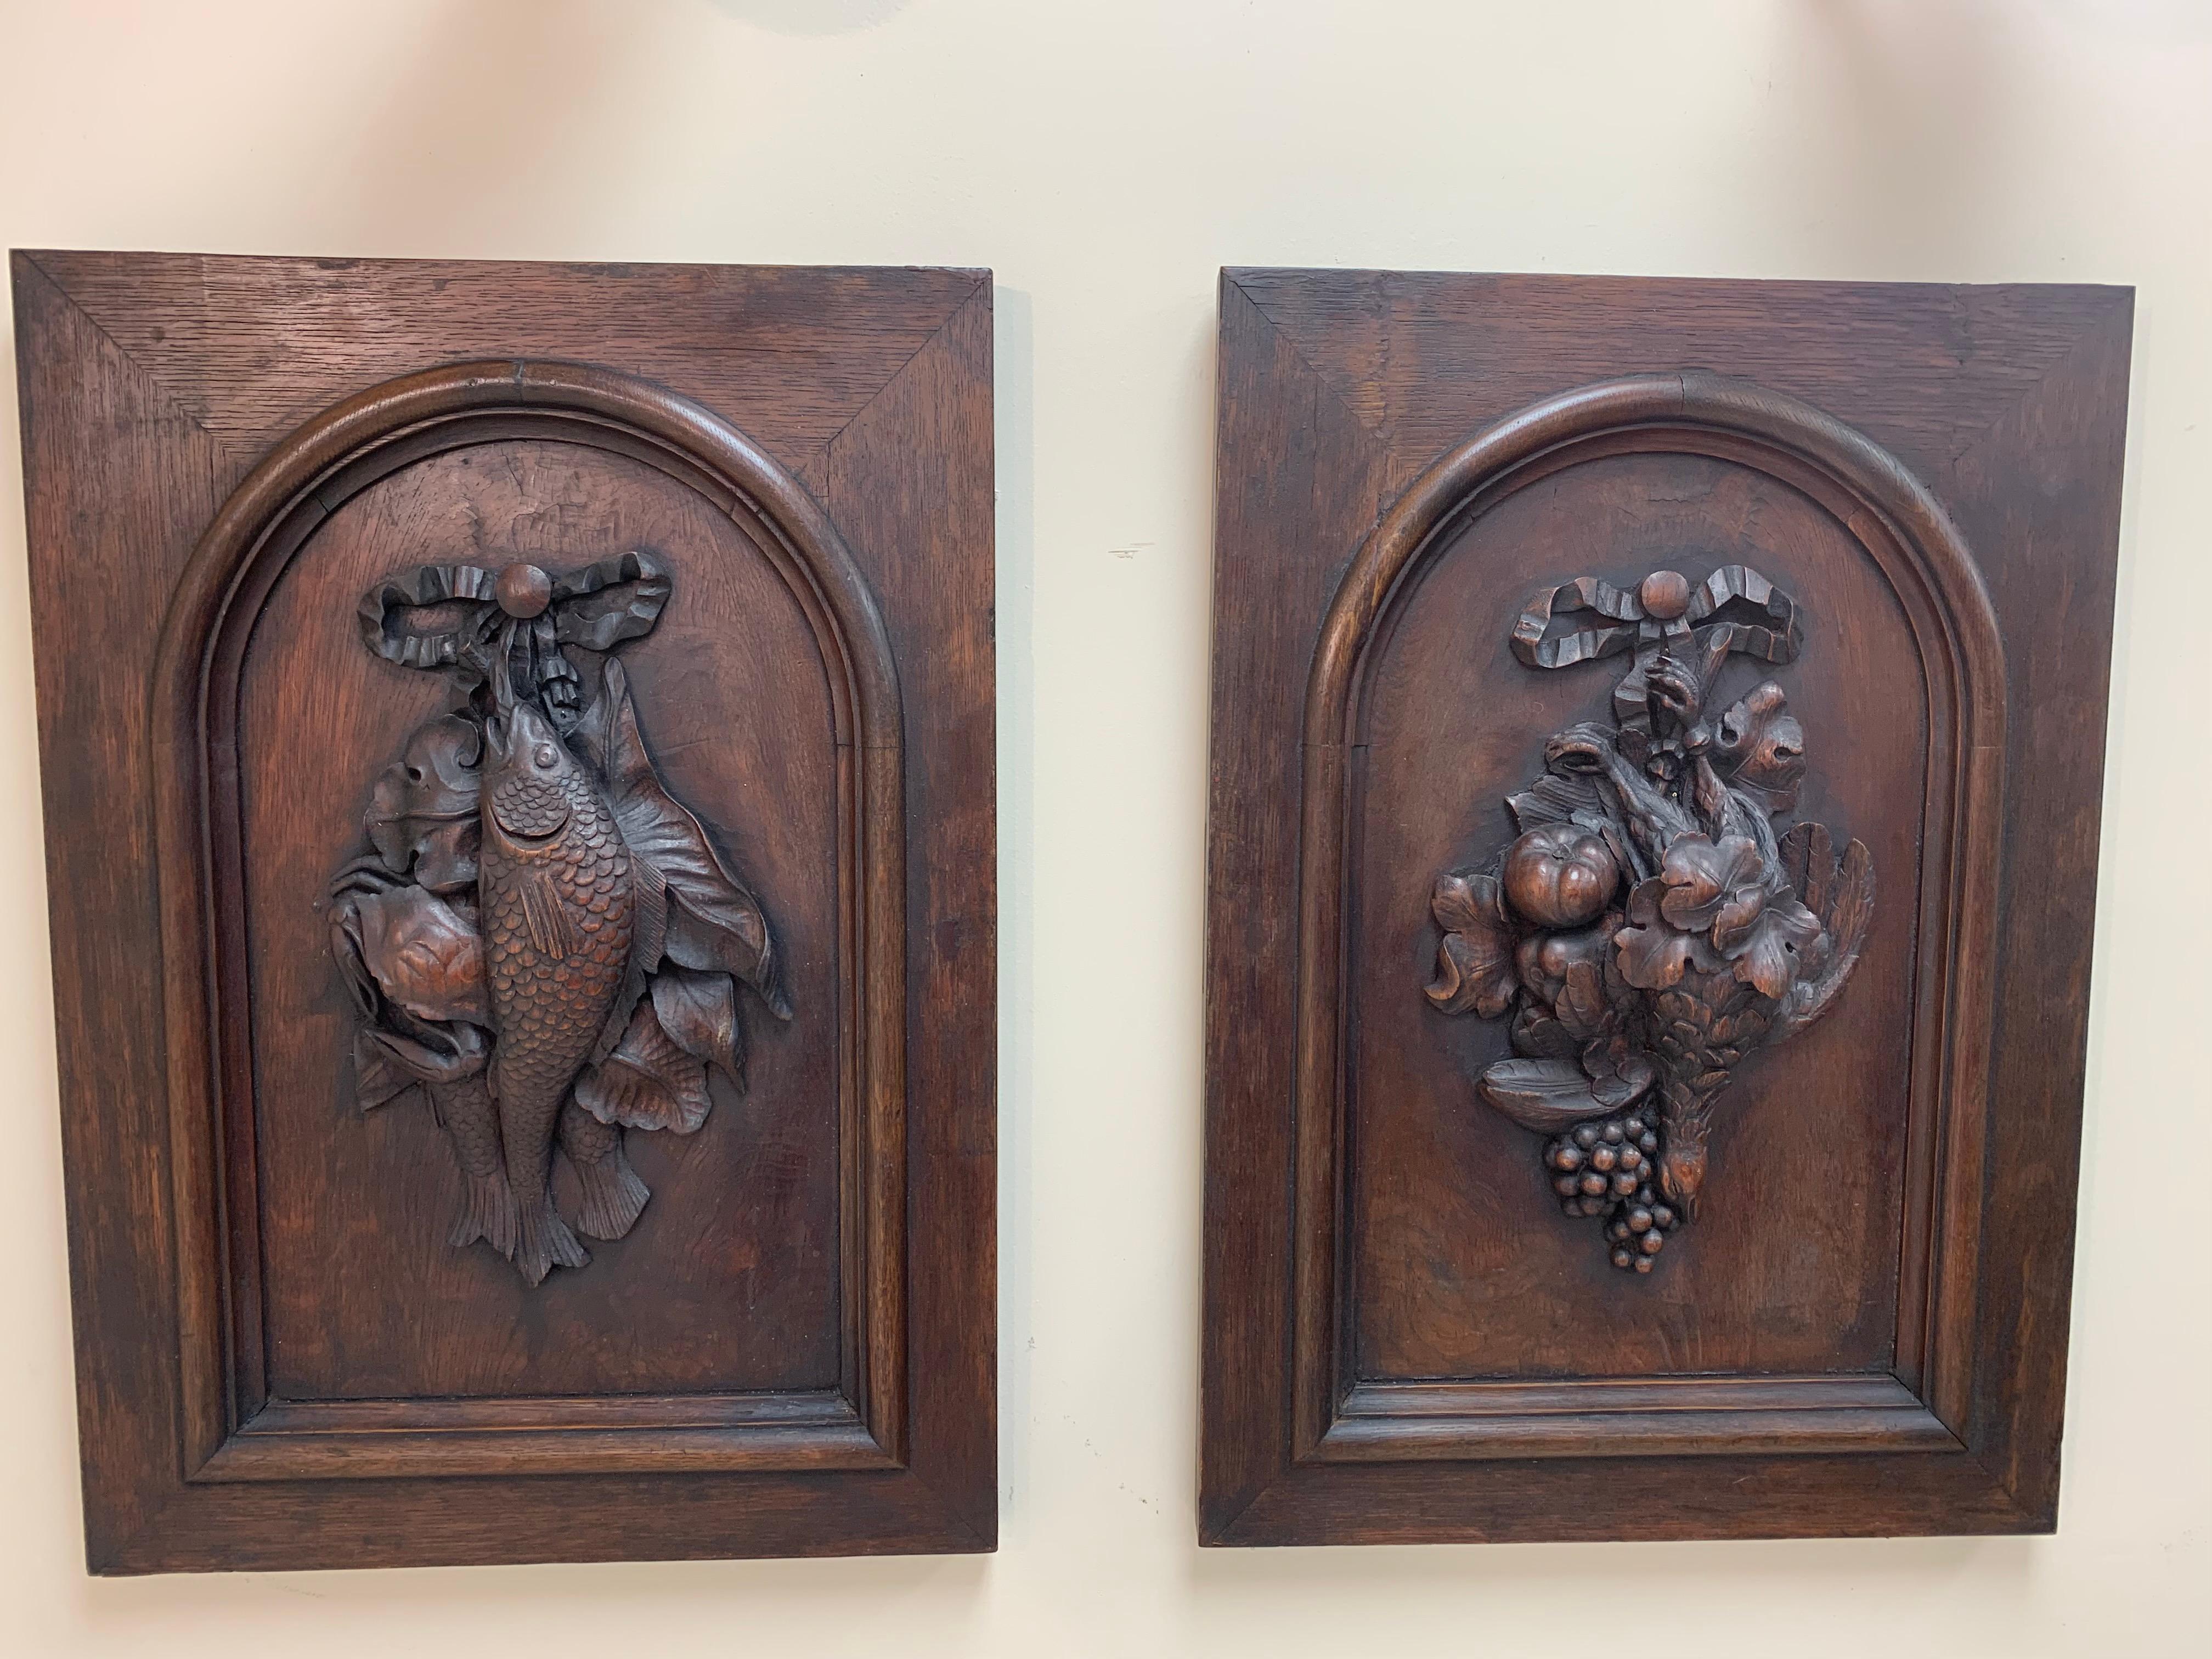 Pair of Black Forest style wall plaques C.1880’s. Each plaque displays beautifully detailed wood carvings, first photo consists of a fish carving and the other plaque consists of a bird carving. Extraordinary craftmanship and detail in each of the